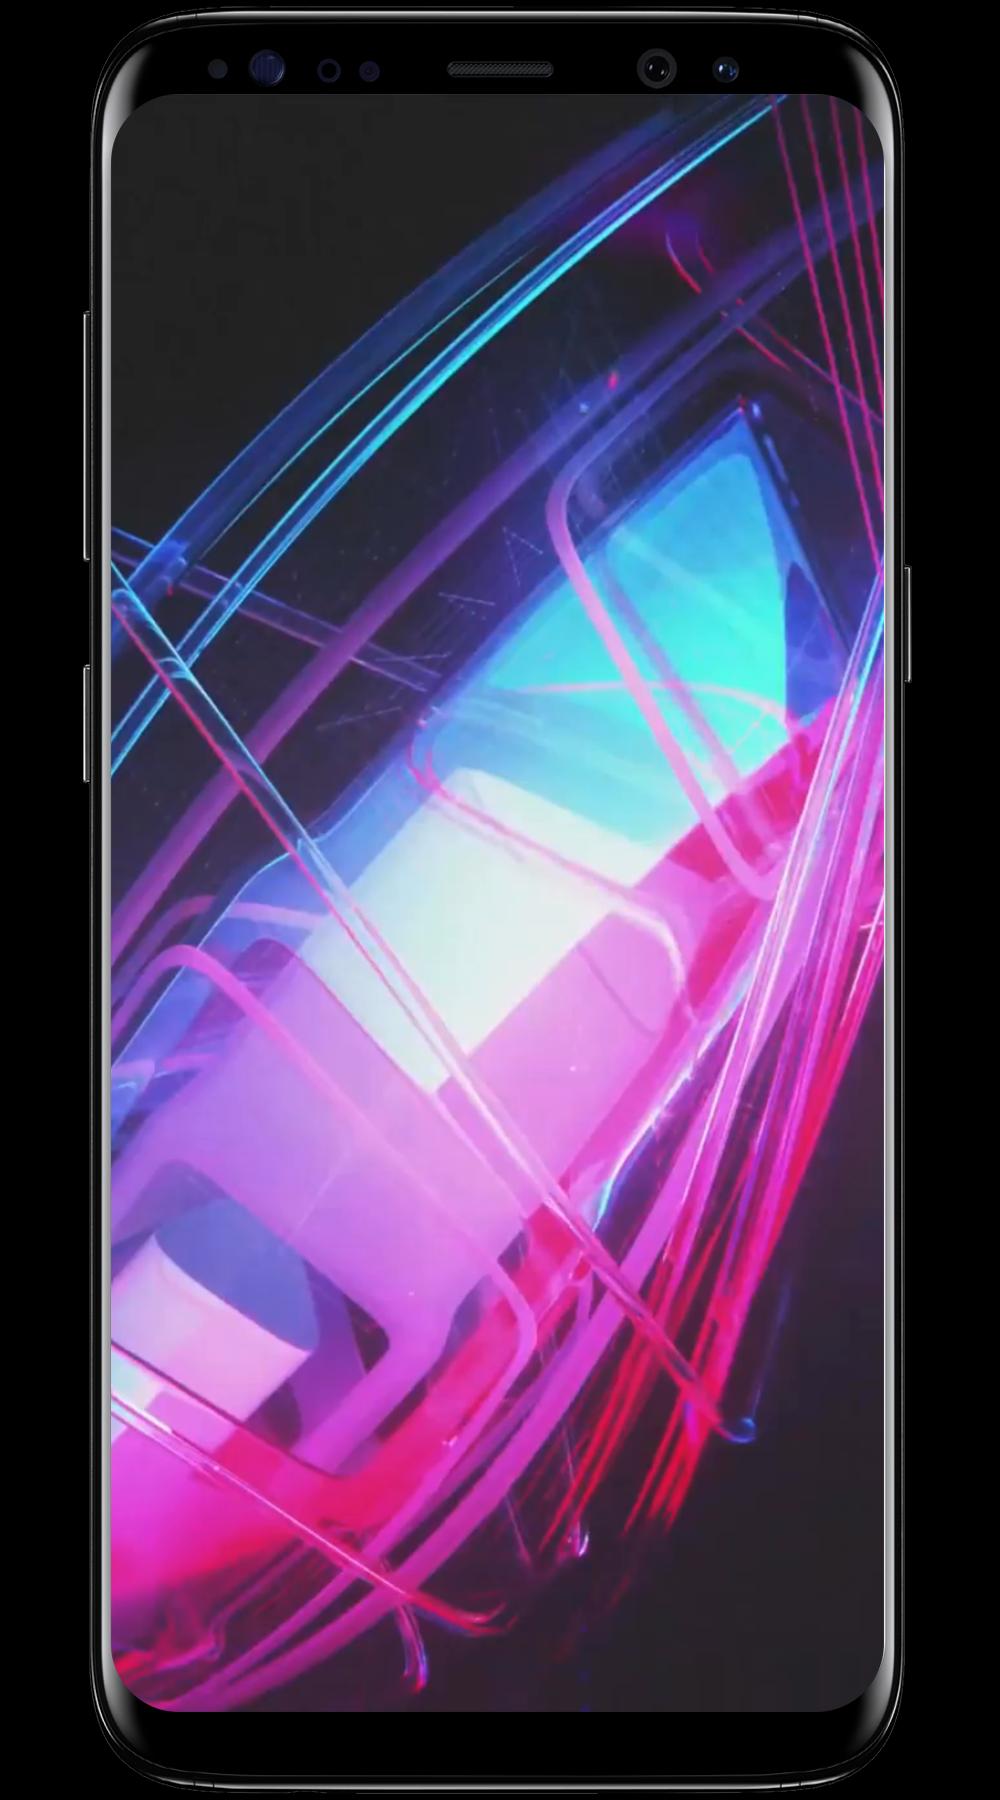  S10  Live Wallpaper  HD Amoled  Background 4K Free for 